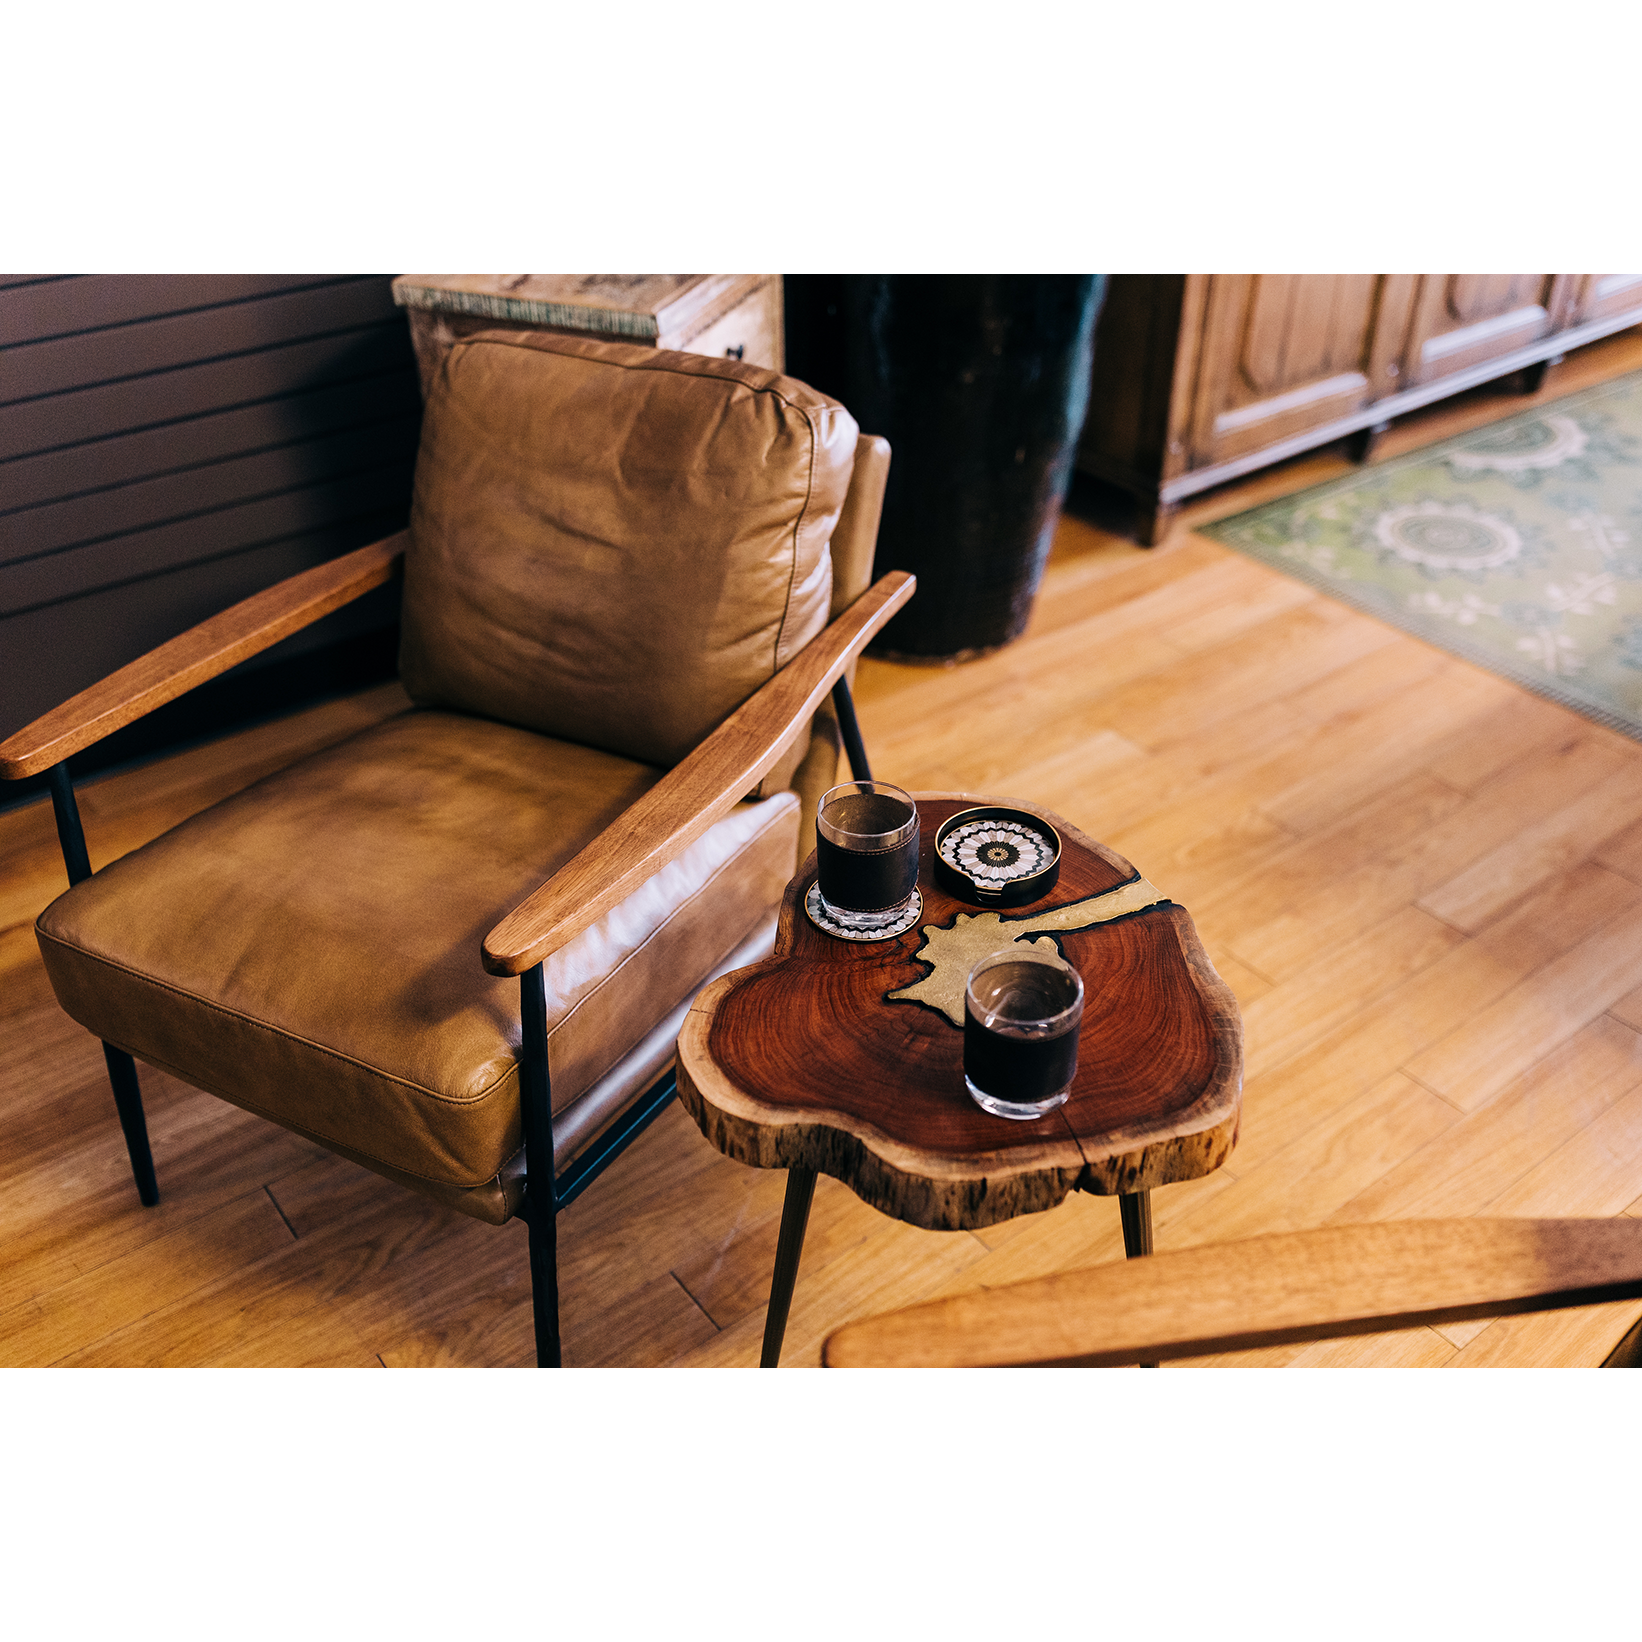 A cozy living room corner with a Gimbal vintage-style top grain leather accent chair, wooden armrests, and a small, round, natural wood coffee table. On the table are two cups of coffee and a book, set upon a carved wooden tray.